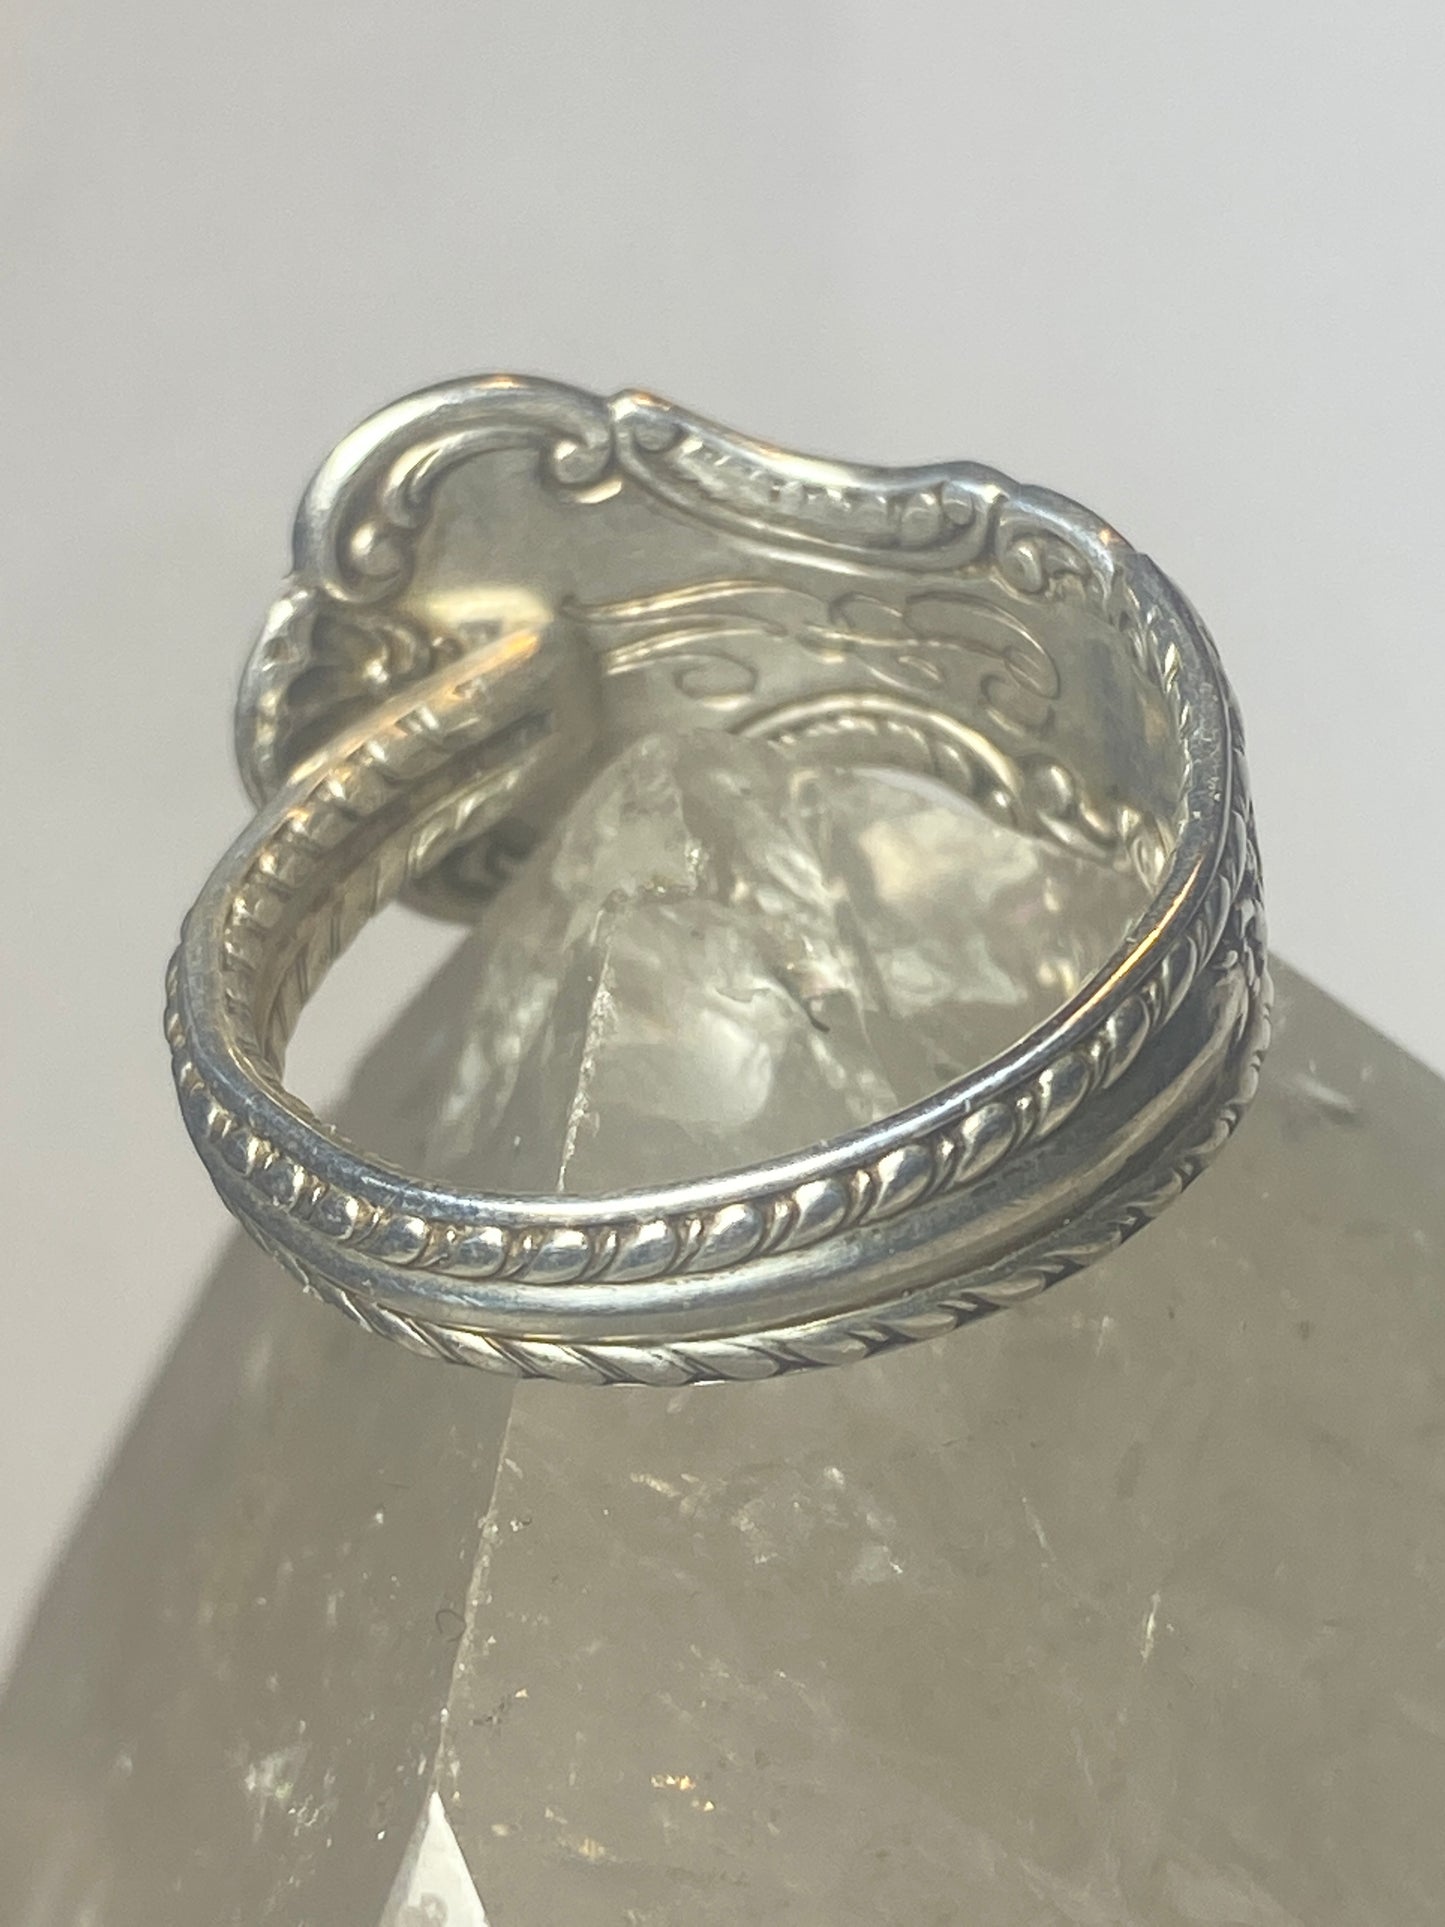 Spoon ring floral band sterling silver women